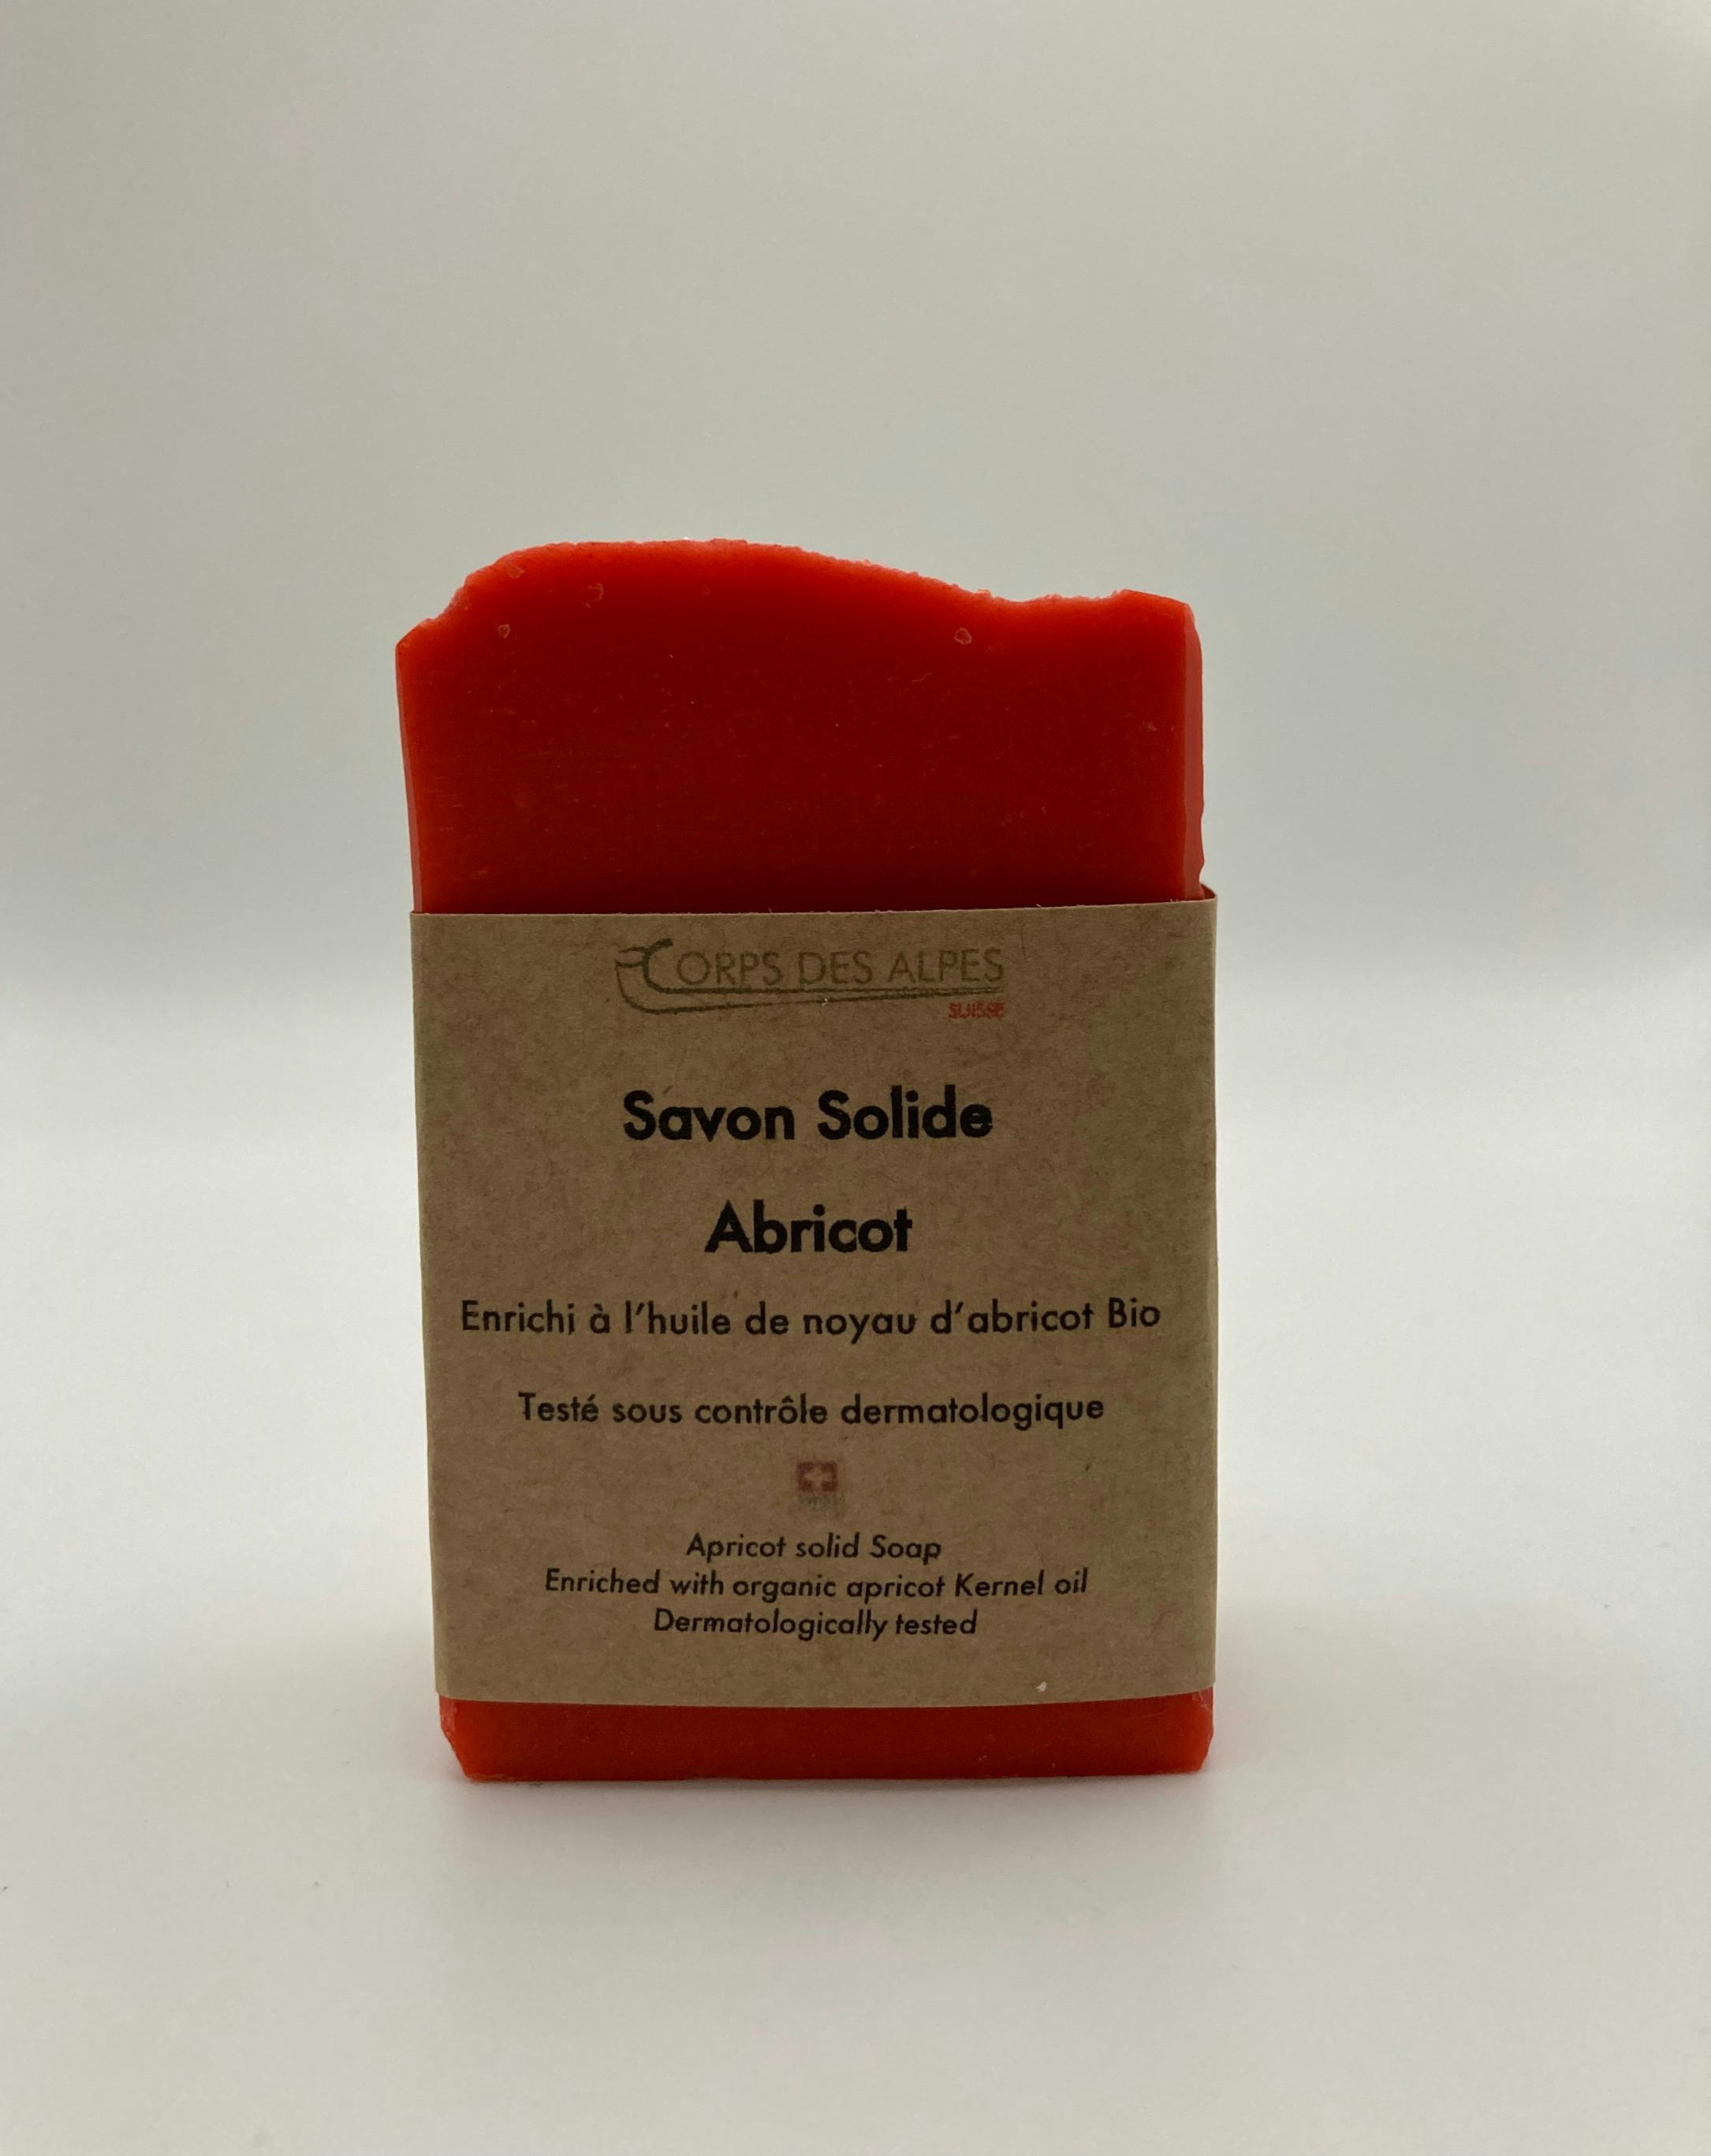 Apricot Solid Soap, artisanal product for direct sale in Switzerland